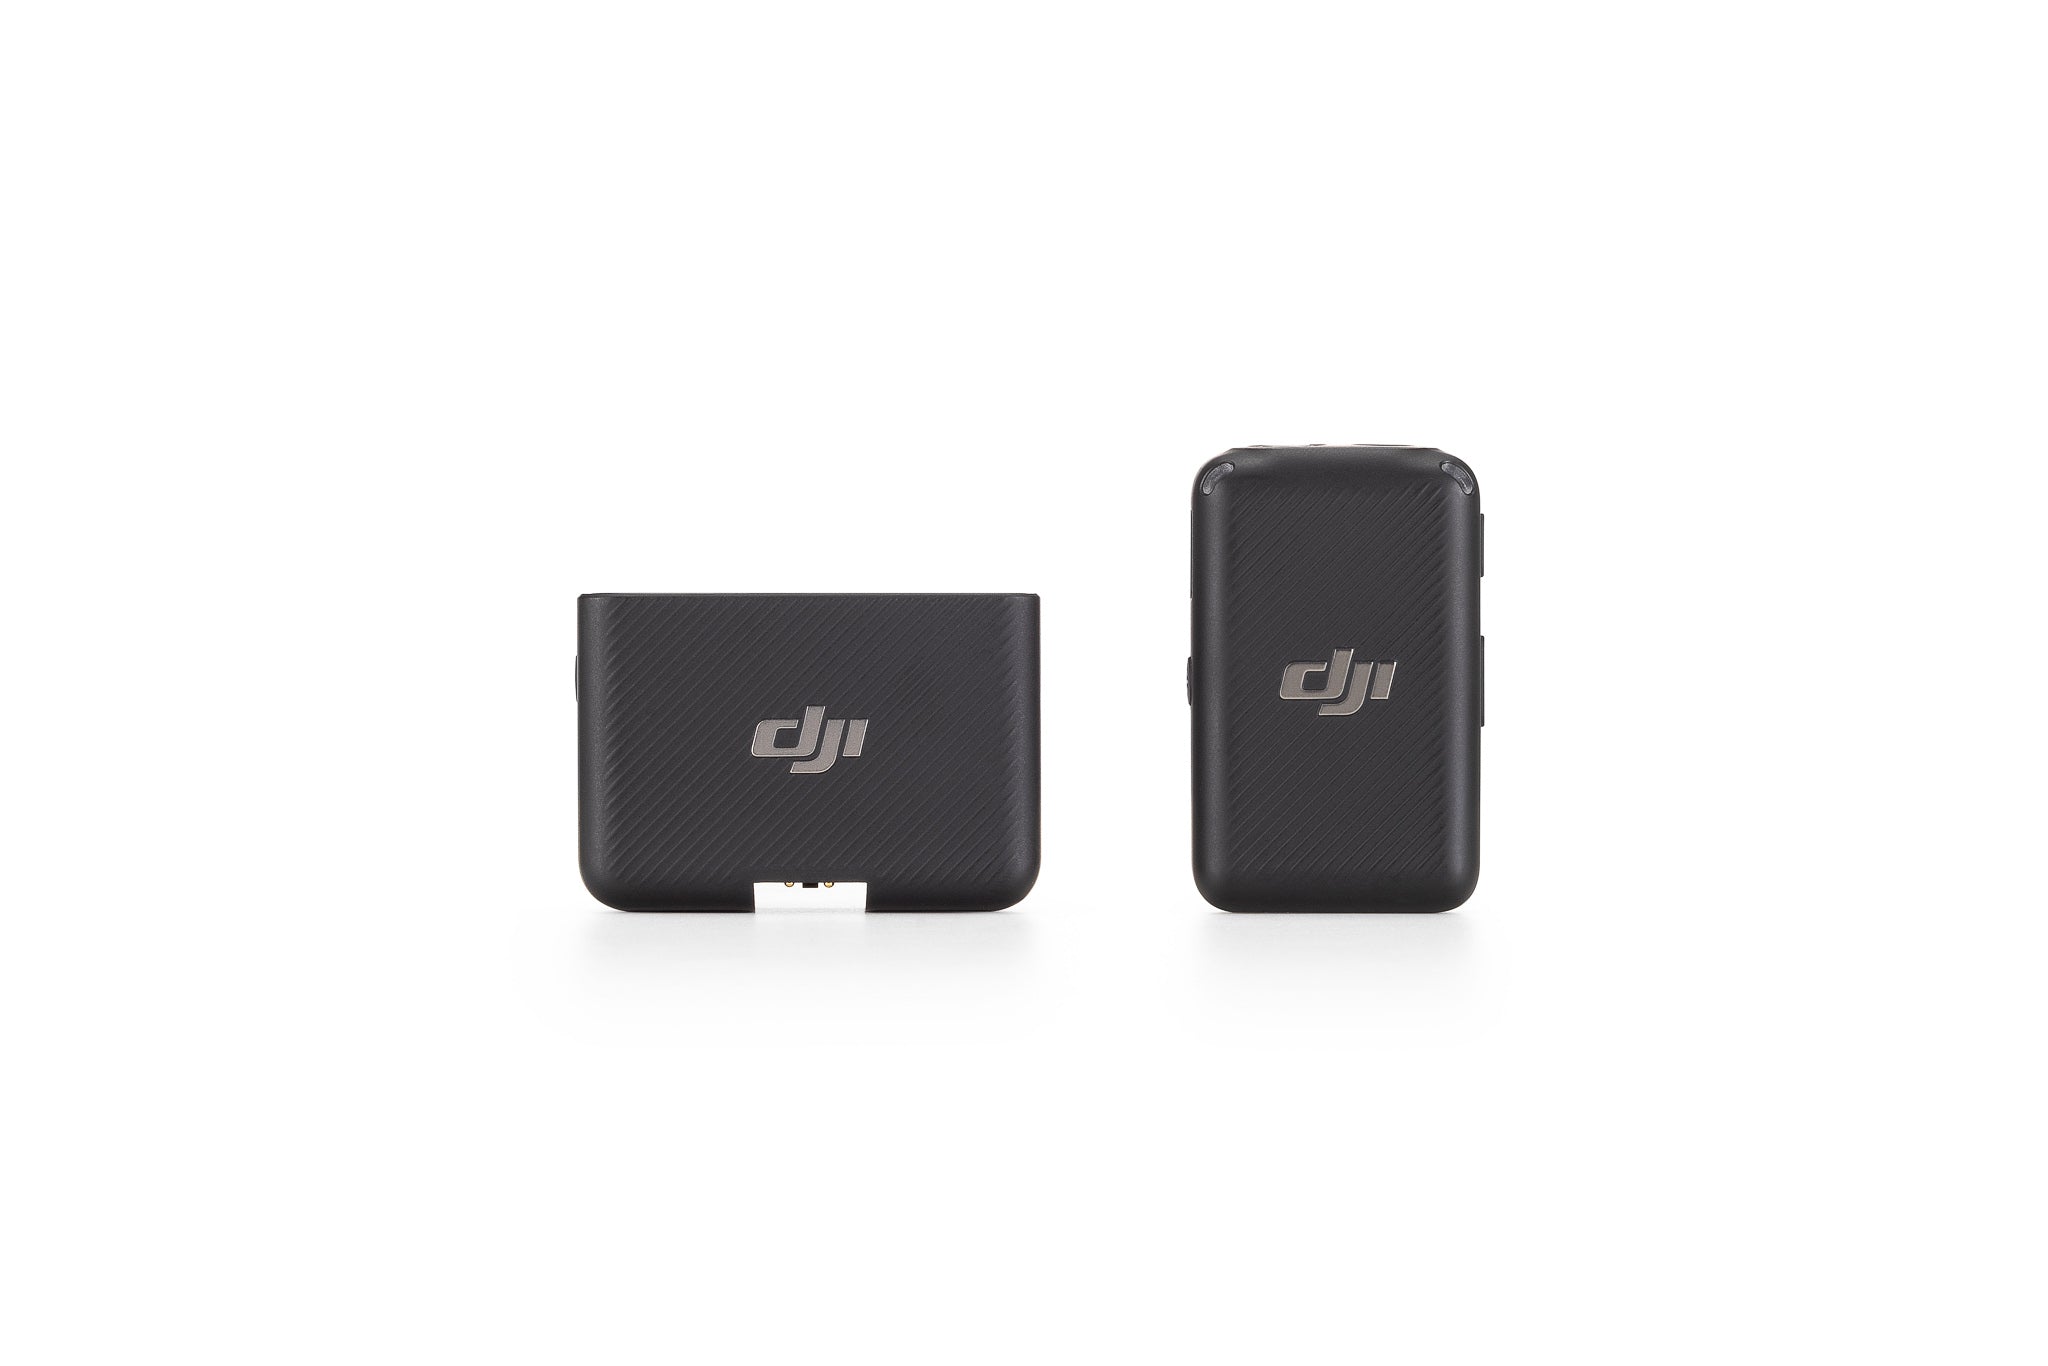 DJI Mic Wireless Microphone Kit - (1Tx + 1Rx) Includes 1 Transmitters, 1 Receiver and Charging Case